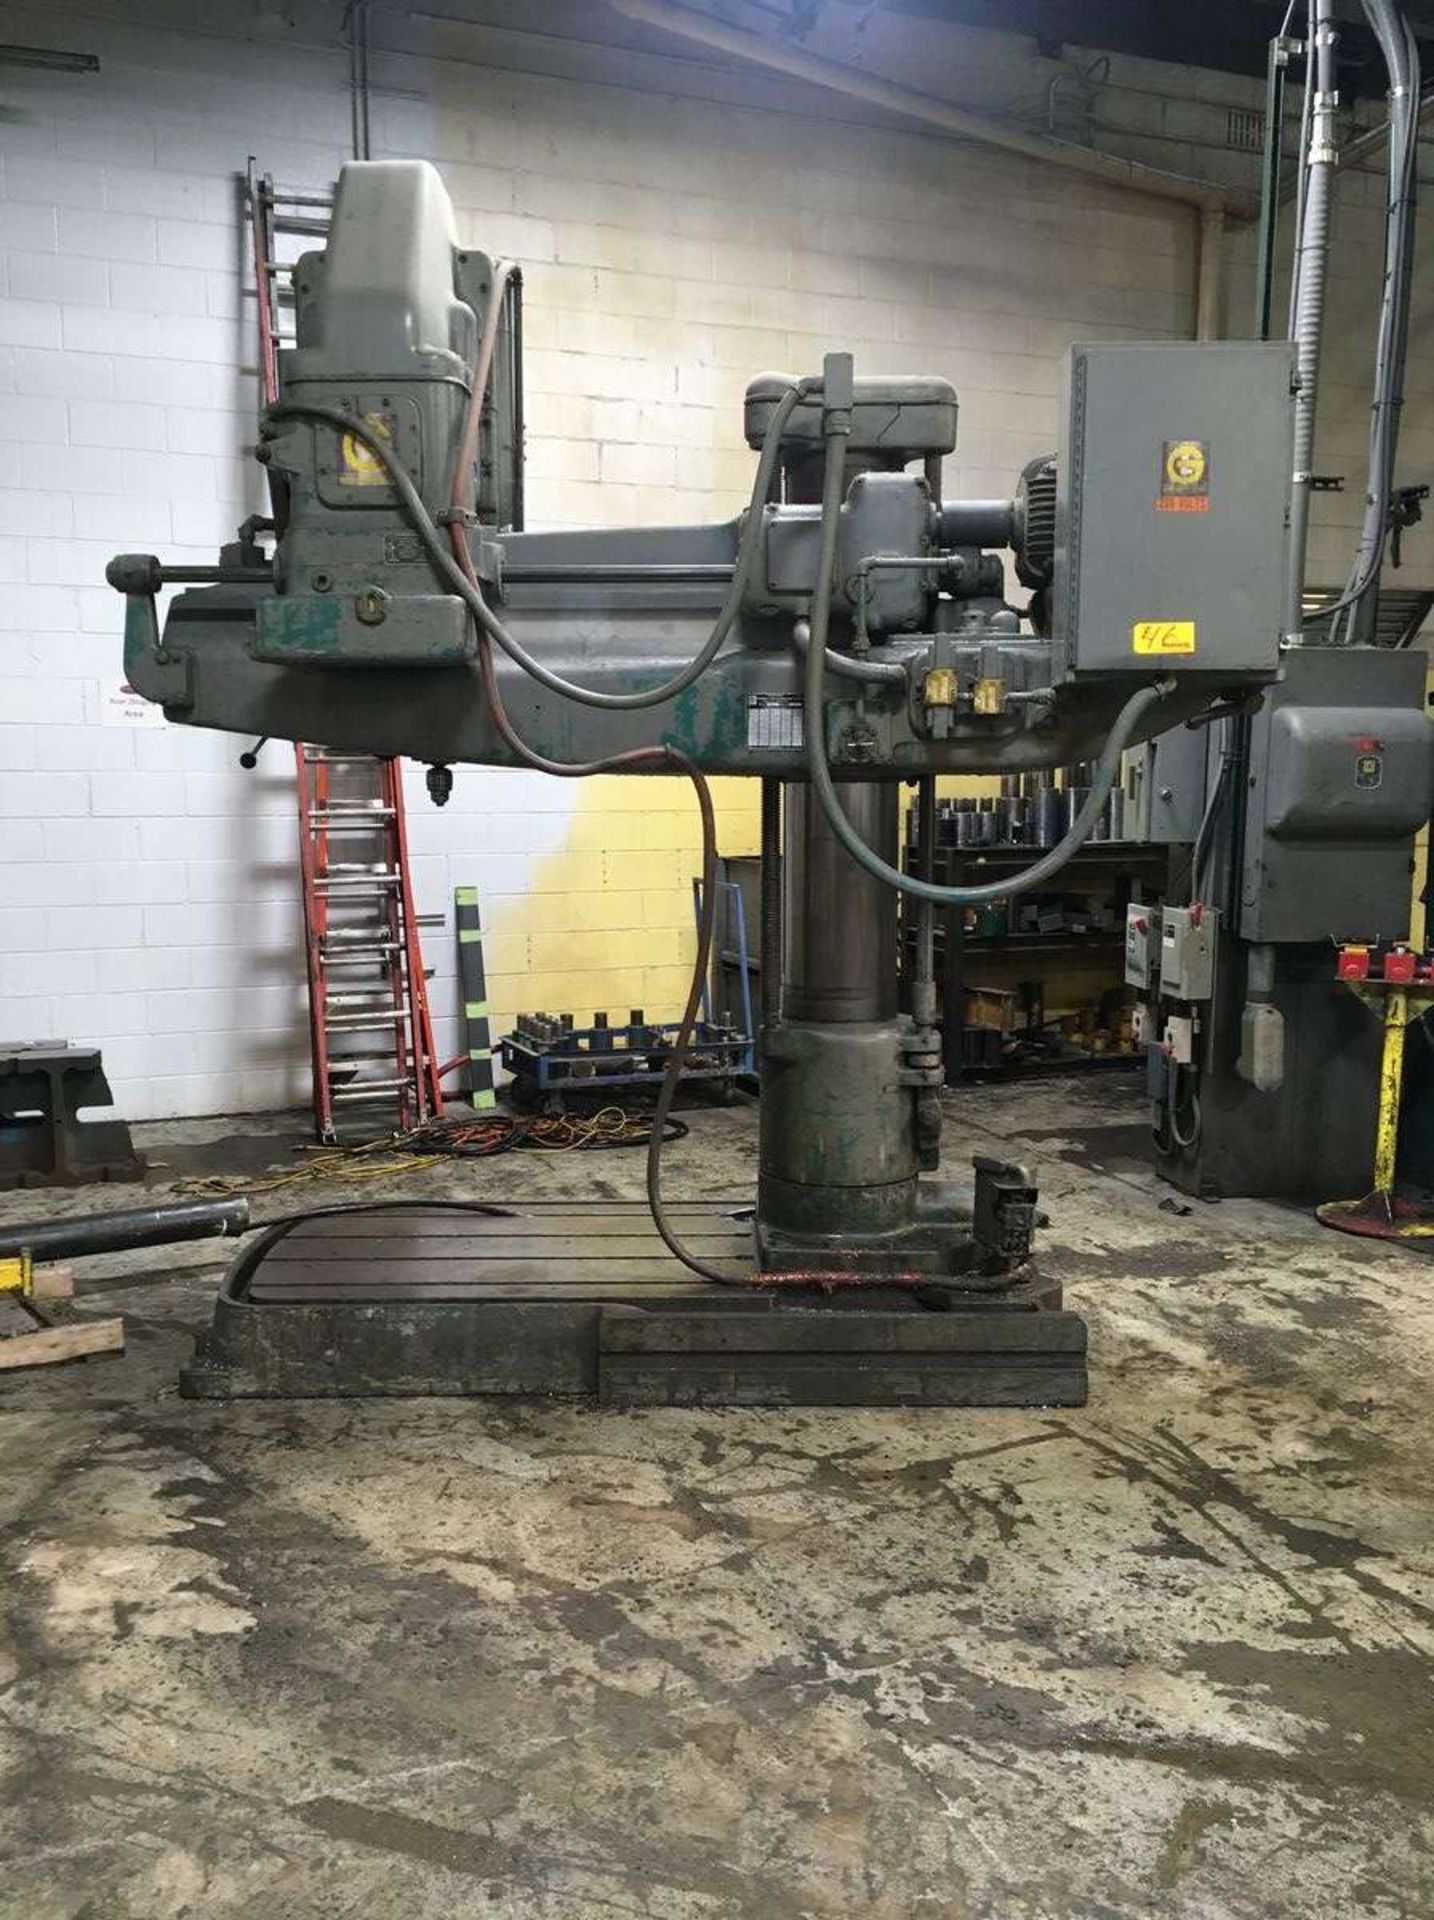 1966 Giddings Lewis Brick ford Chip master 4'x13'' Radial Arm Drill